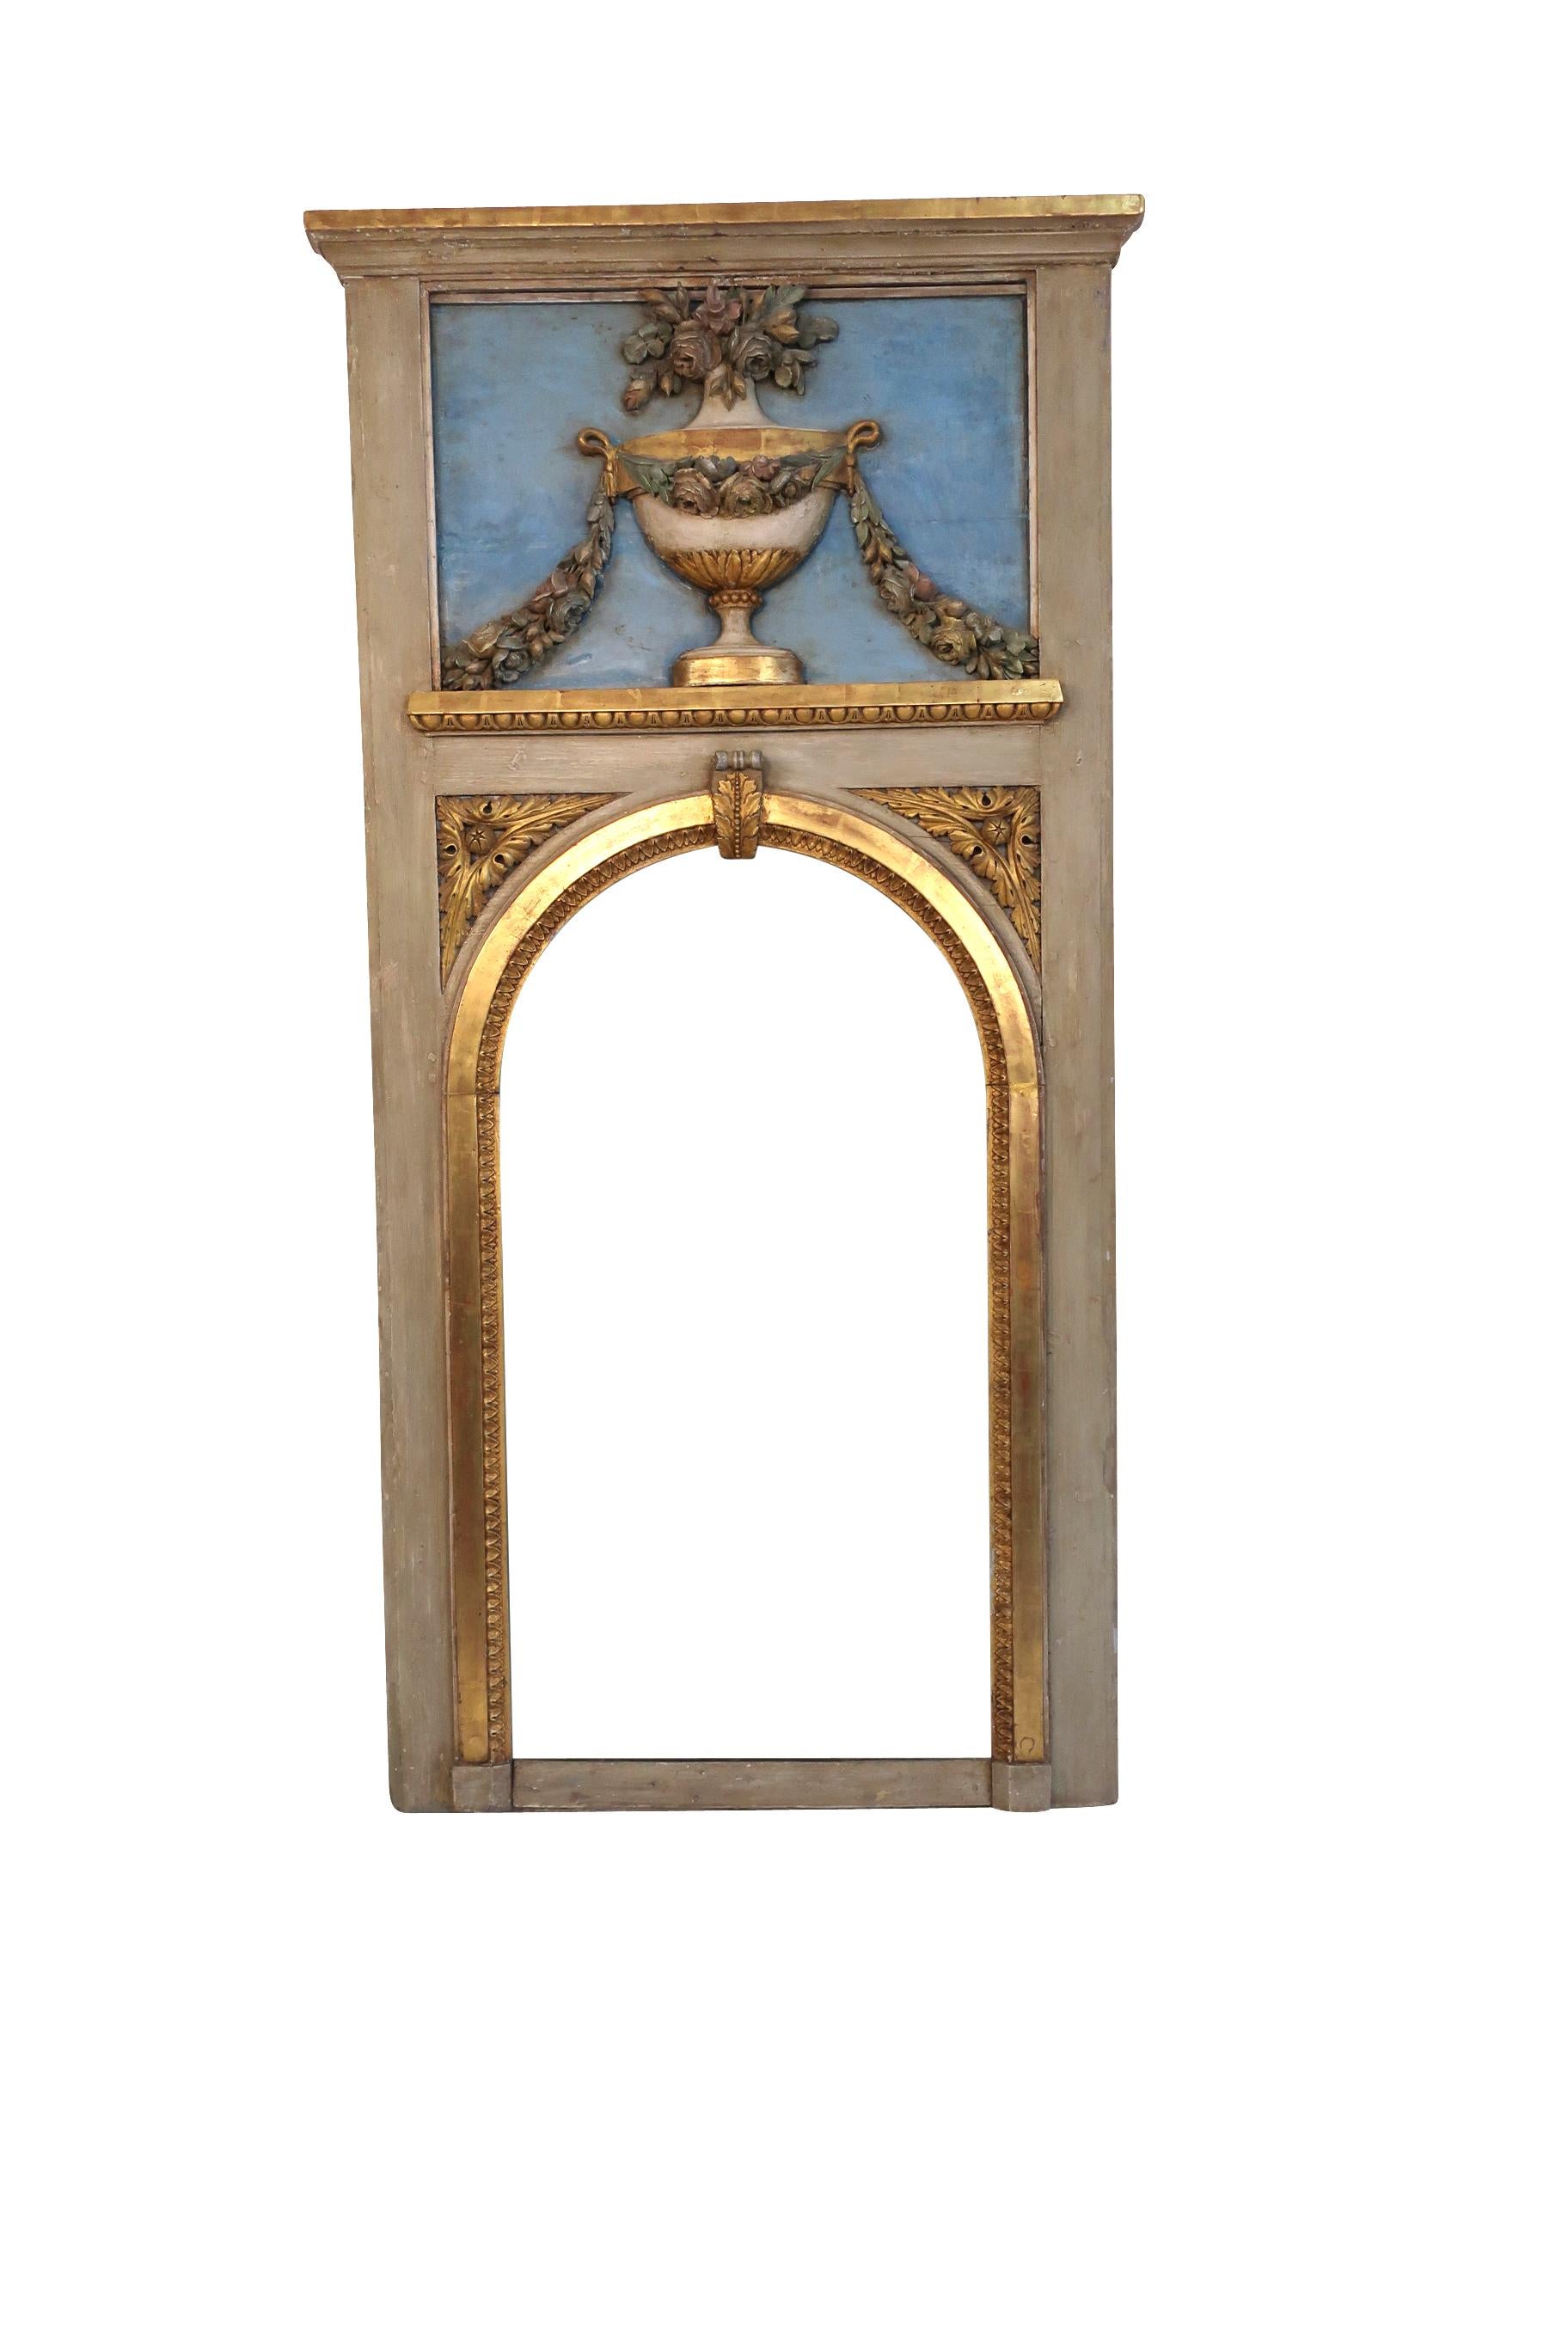 19th Century Blue Trumeau Mirror with Urn, Garland and Floral Decoration  For Sale 2